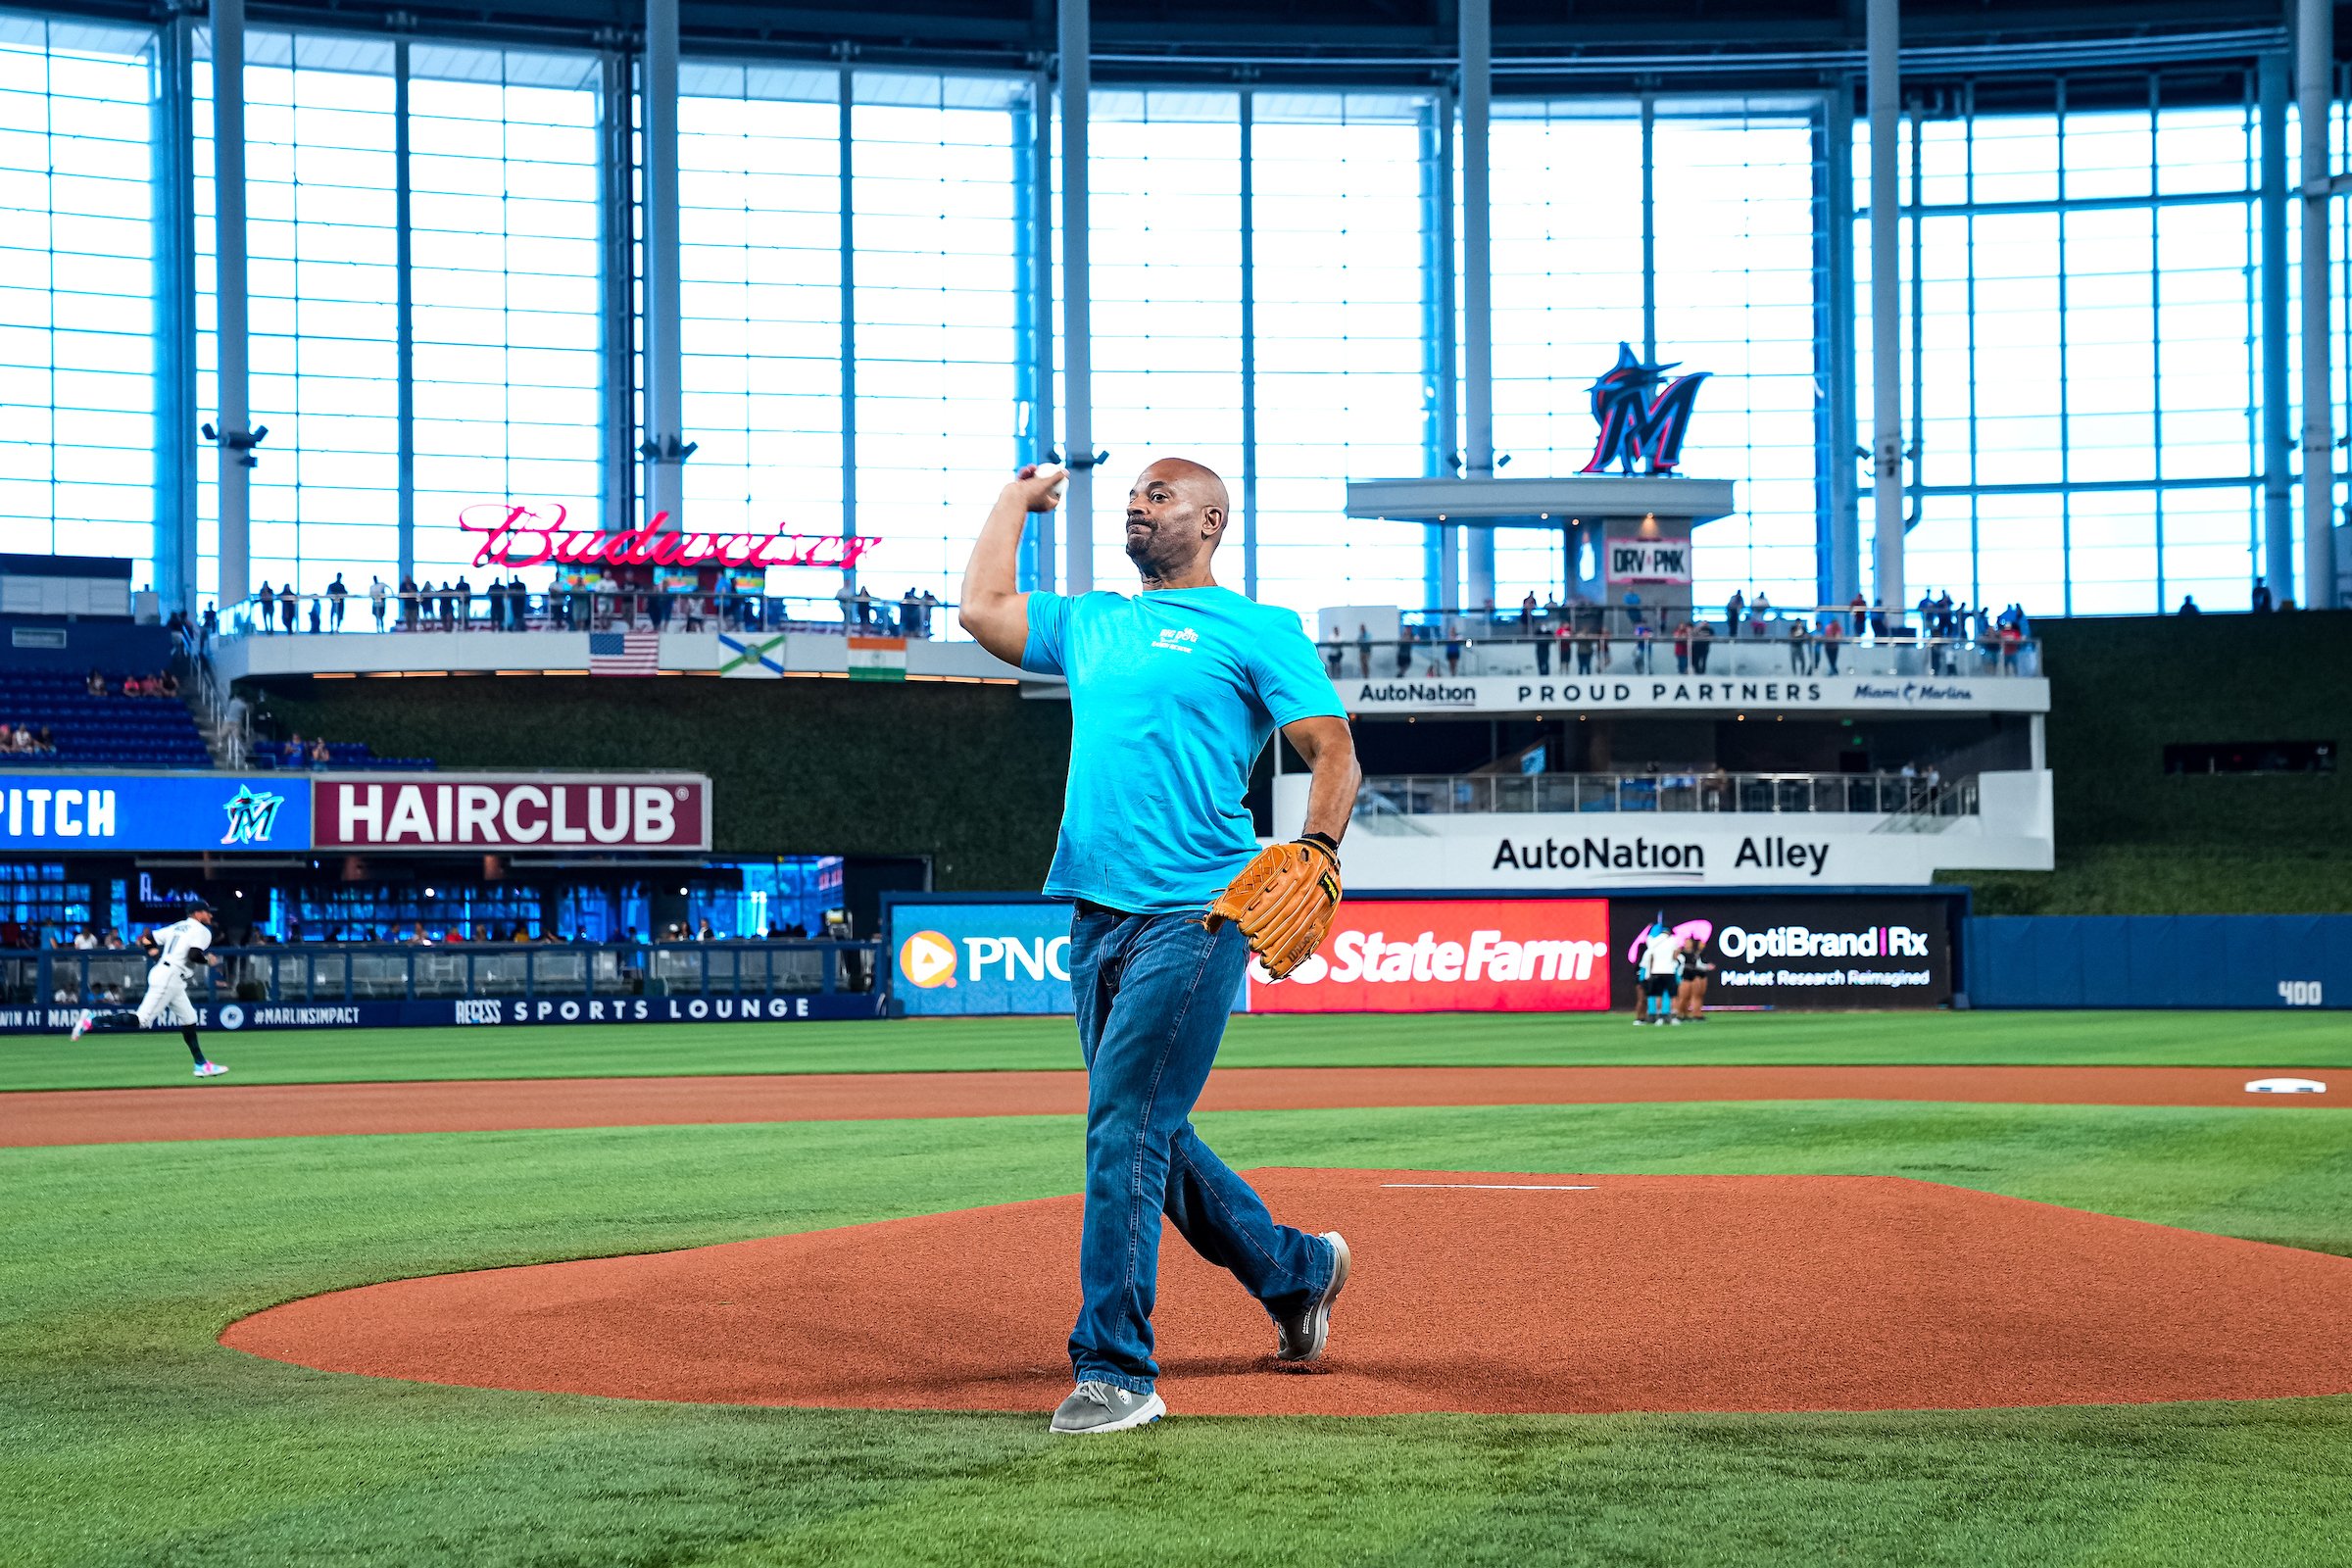  MIAMI, FLORIDA - SEPTEMBER 11: First pitch before a baseball game against the New York Mets on September 11, 2022 at loanDepot park in Miami, Florida. 